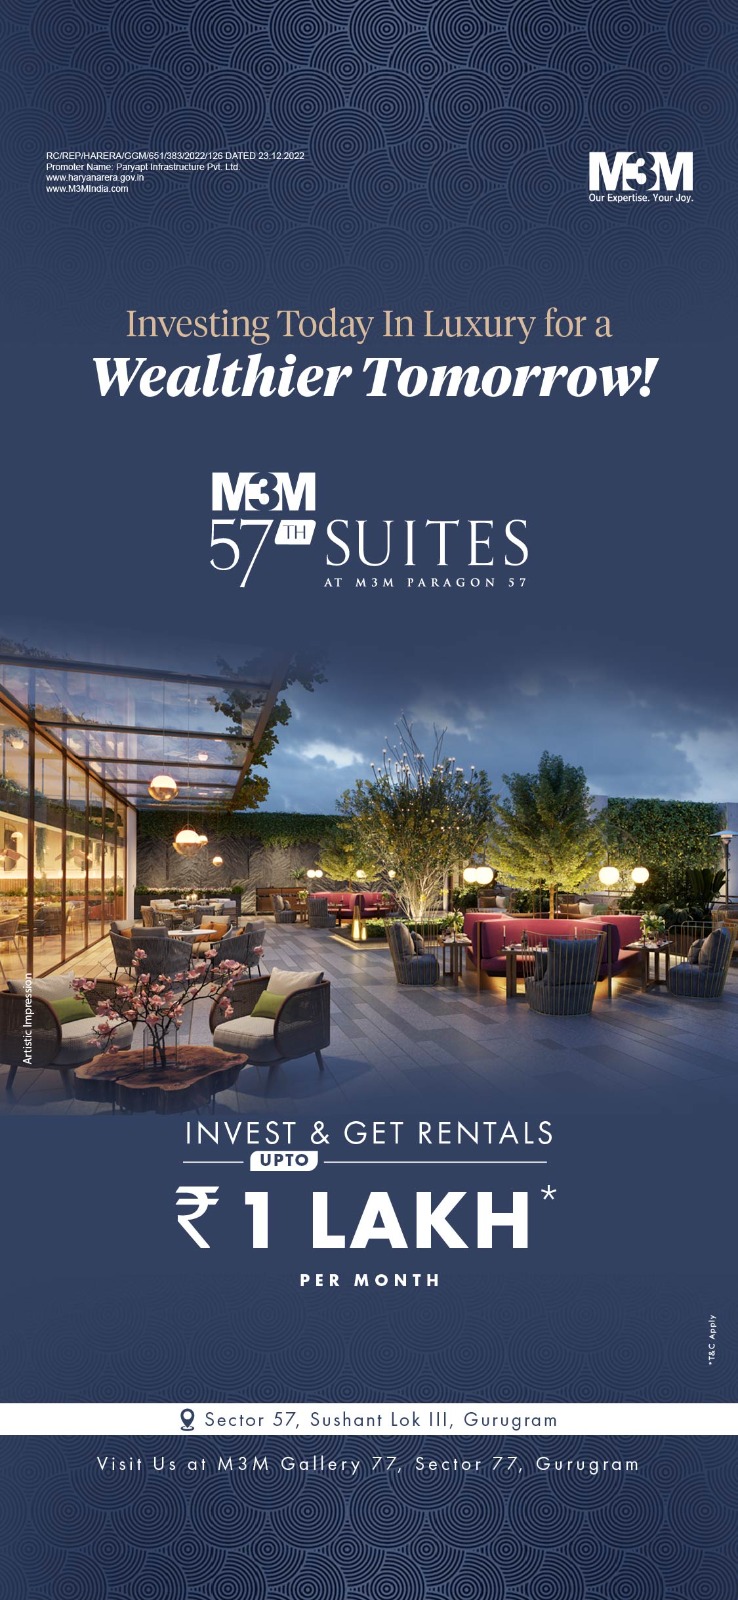 M3M Paragon 37: Invest in Luxury Apartments and Earn High Rentals in Gurgaon** Update